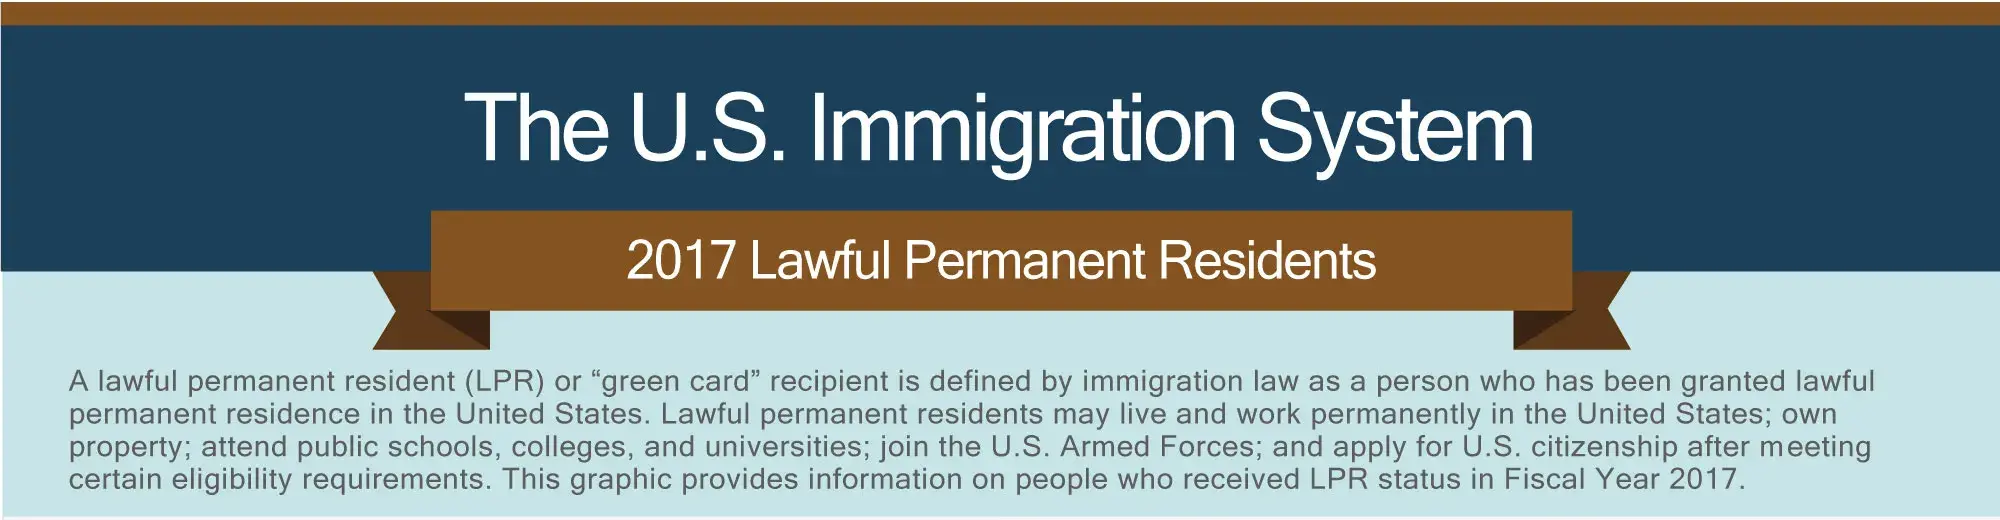 The U.S. Immigration System. 2017 Lawful Permanent Residents. A lawful permanent resident (LPR) or "green card" is defined by immigration law as a person who has been granted lawful permanent residence in the United States. Lawful permanent residents may live and work permanently in the United States; own property; attend public schools, colleges, and universities; join the U.S. Armed Forces; and apply to become a U.S. citizen after meeting certain eligibility requirements. This graphic provides information on those who received LPR status in Fiscal Year 2017.